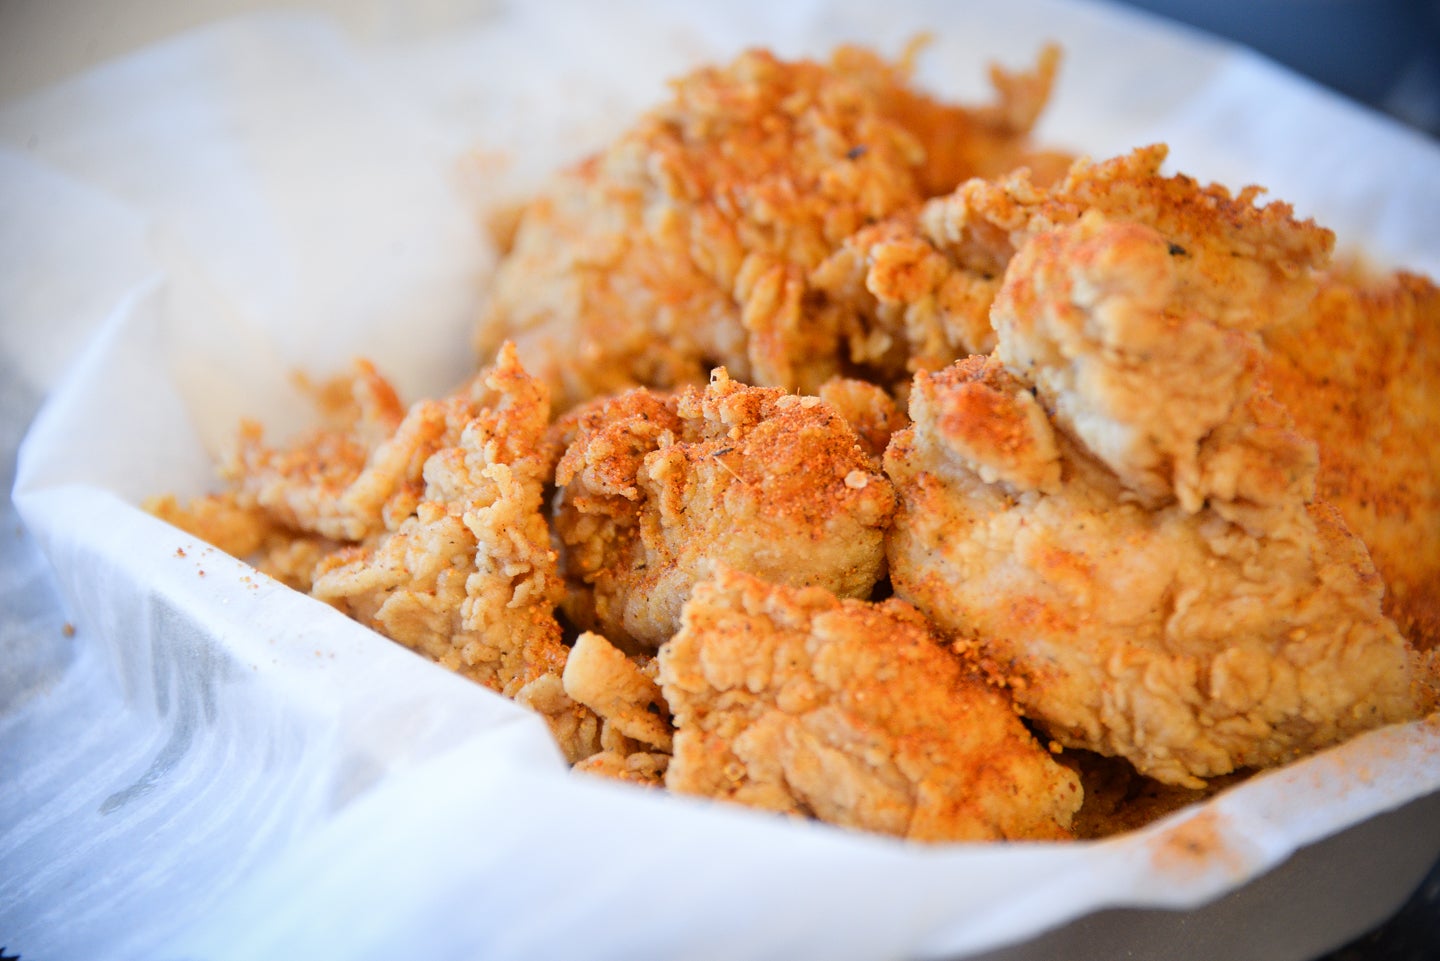 Served hot: Ricky Warfield taking his fried chicken to the next level